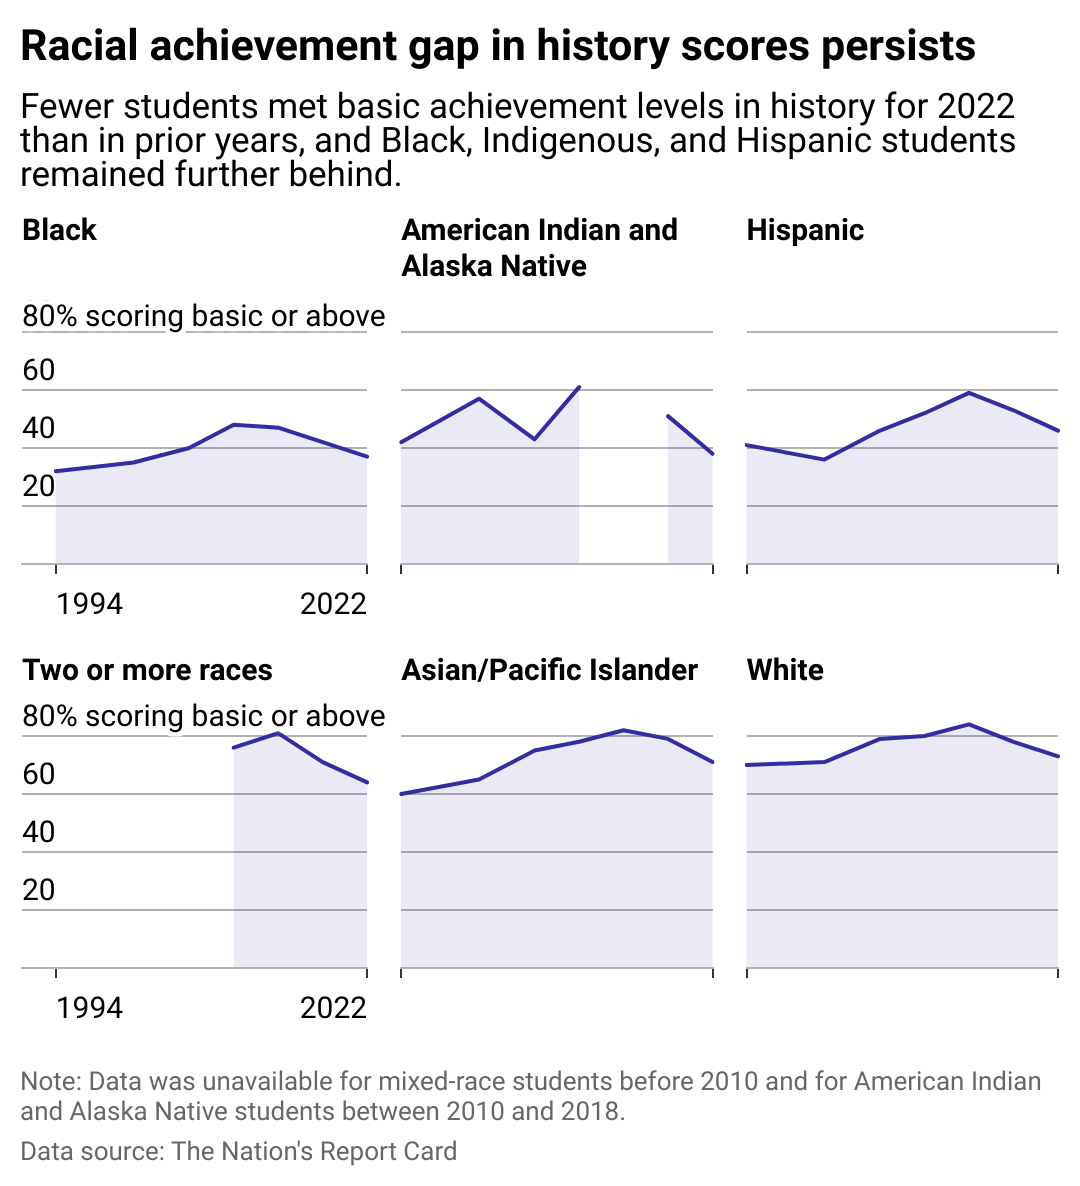 Various line charts illustrating the racial achievement gap for students of different racial groups from 1994 to 2022.